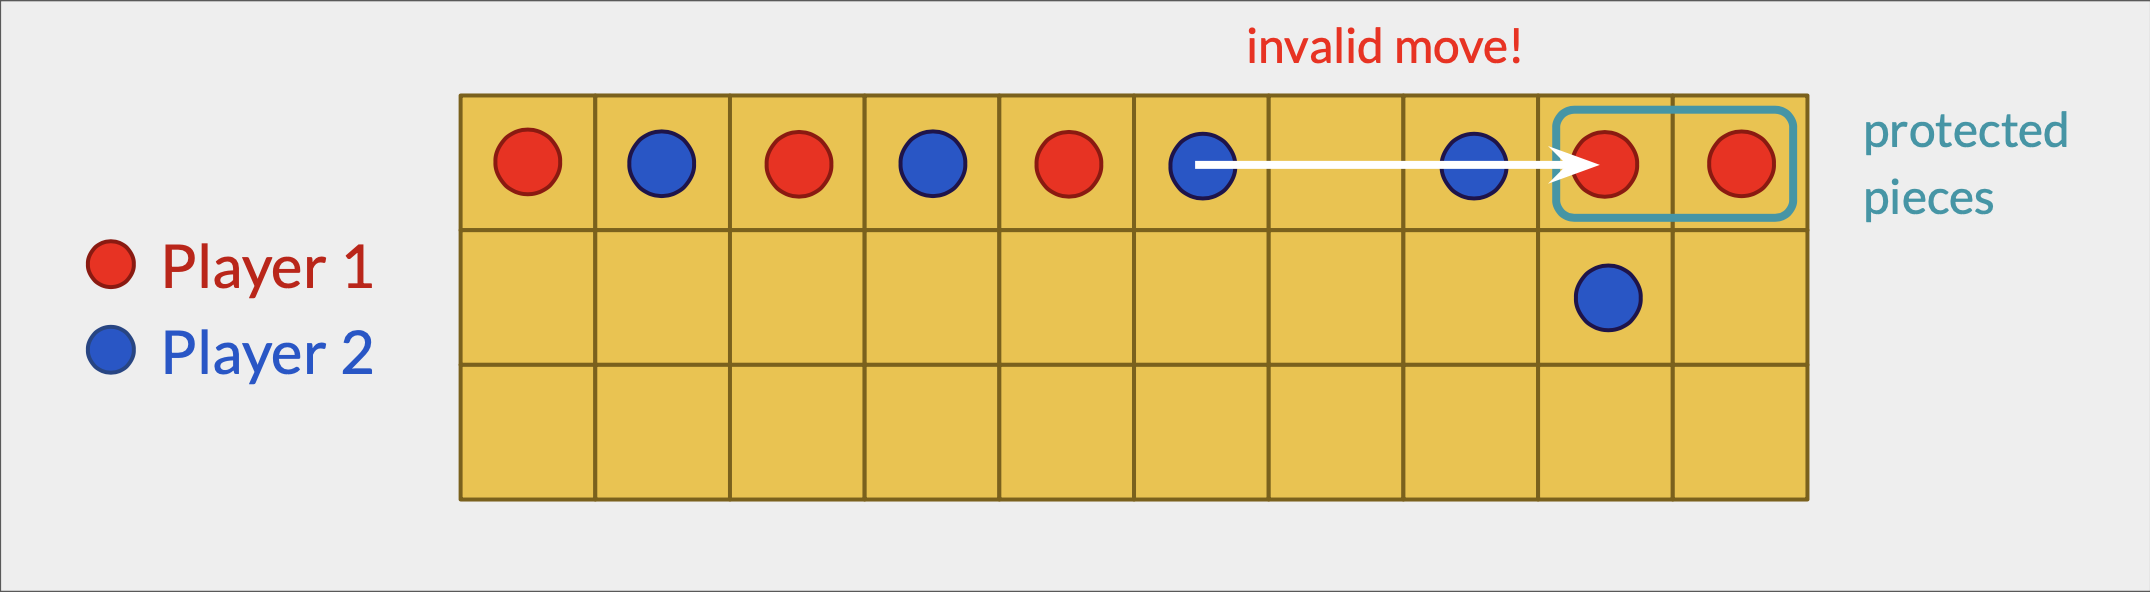 player-2-move-cell-6-dice-3